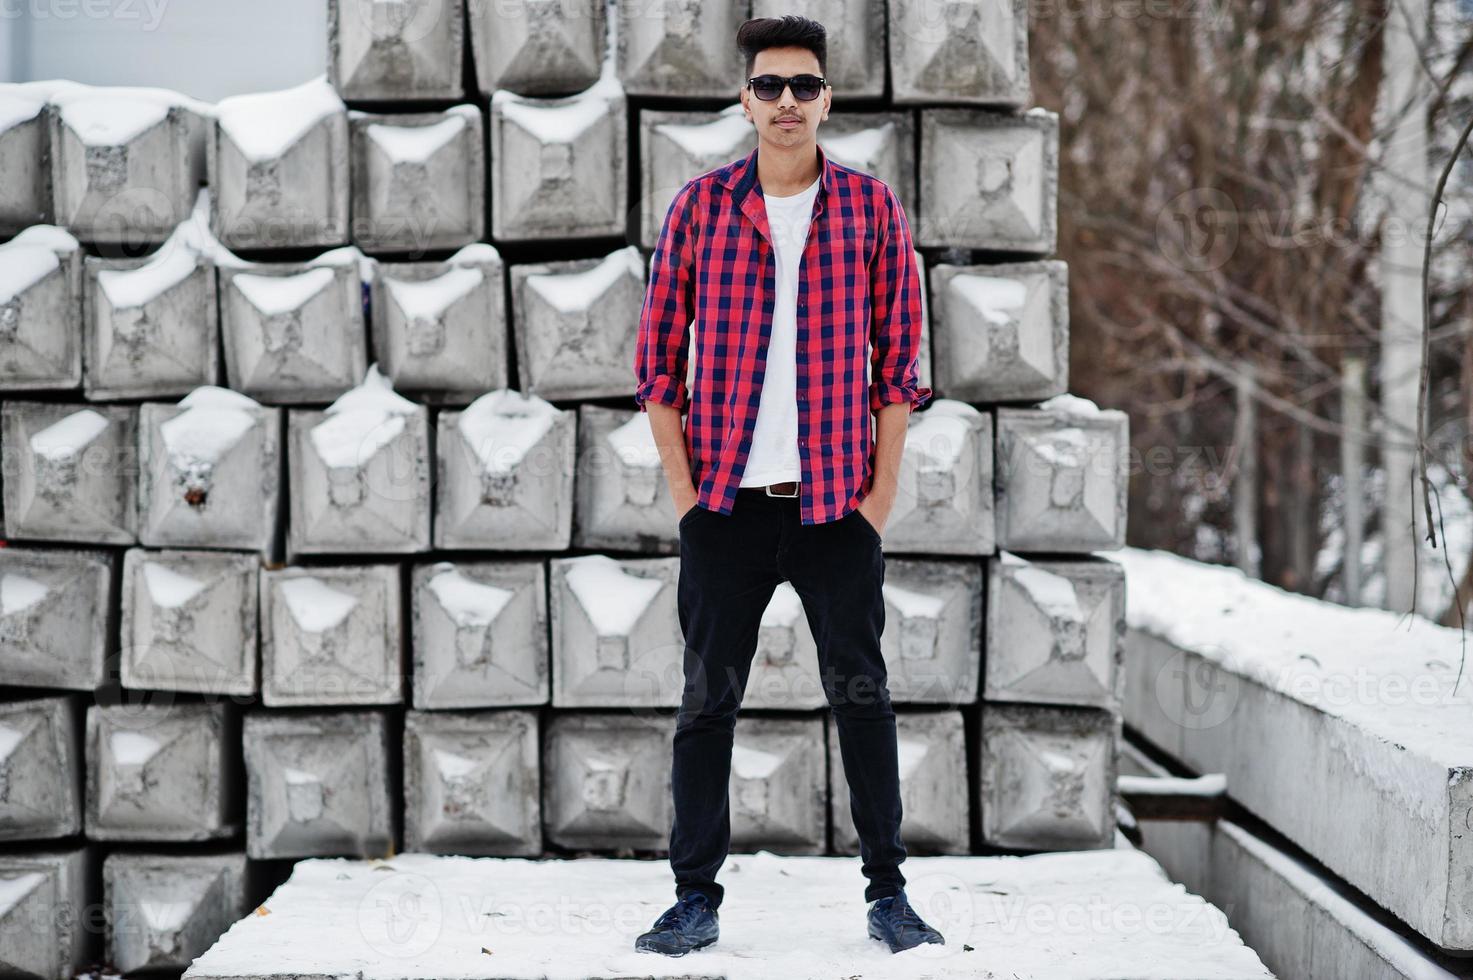 Casual young indian man in checkered shirt and sunglasses posed against stone blocks. photo